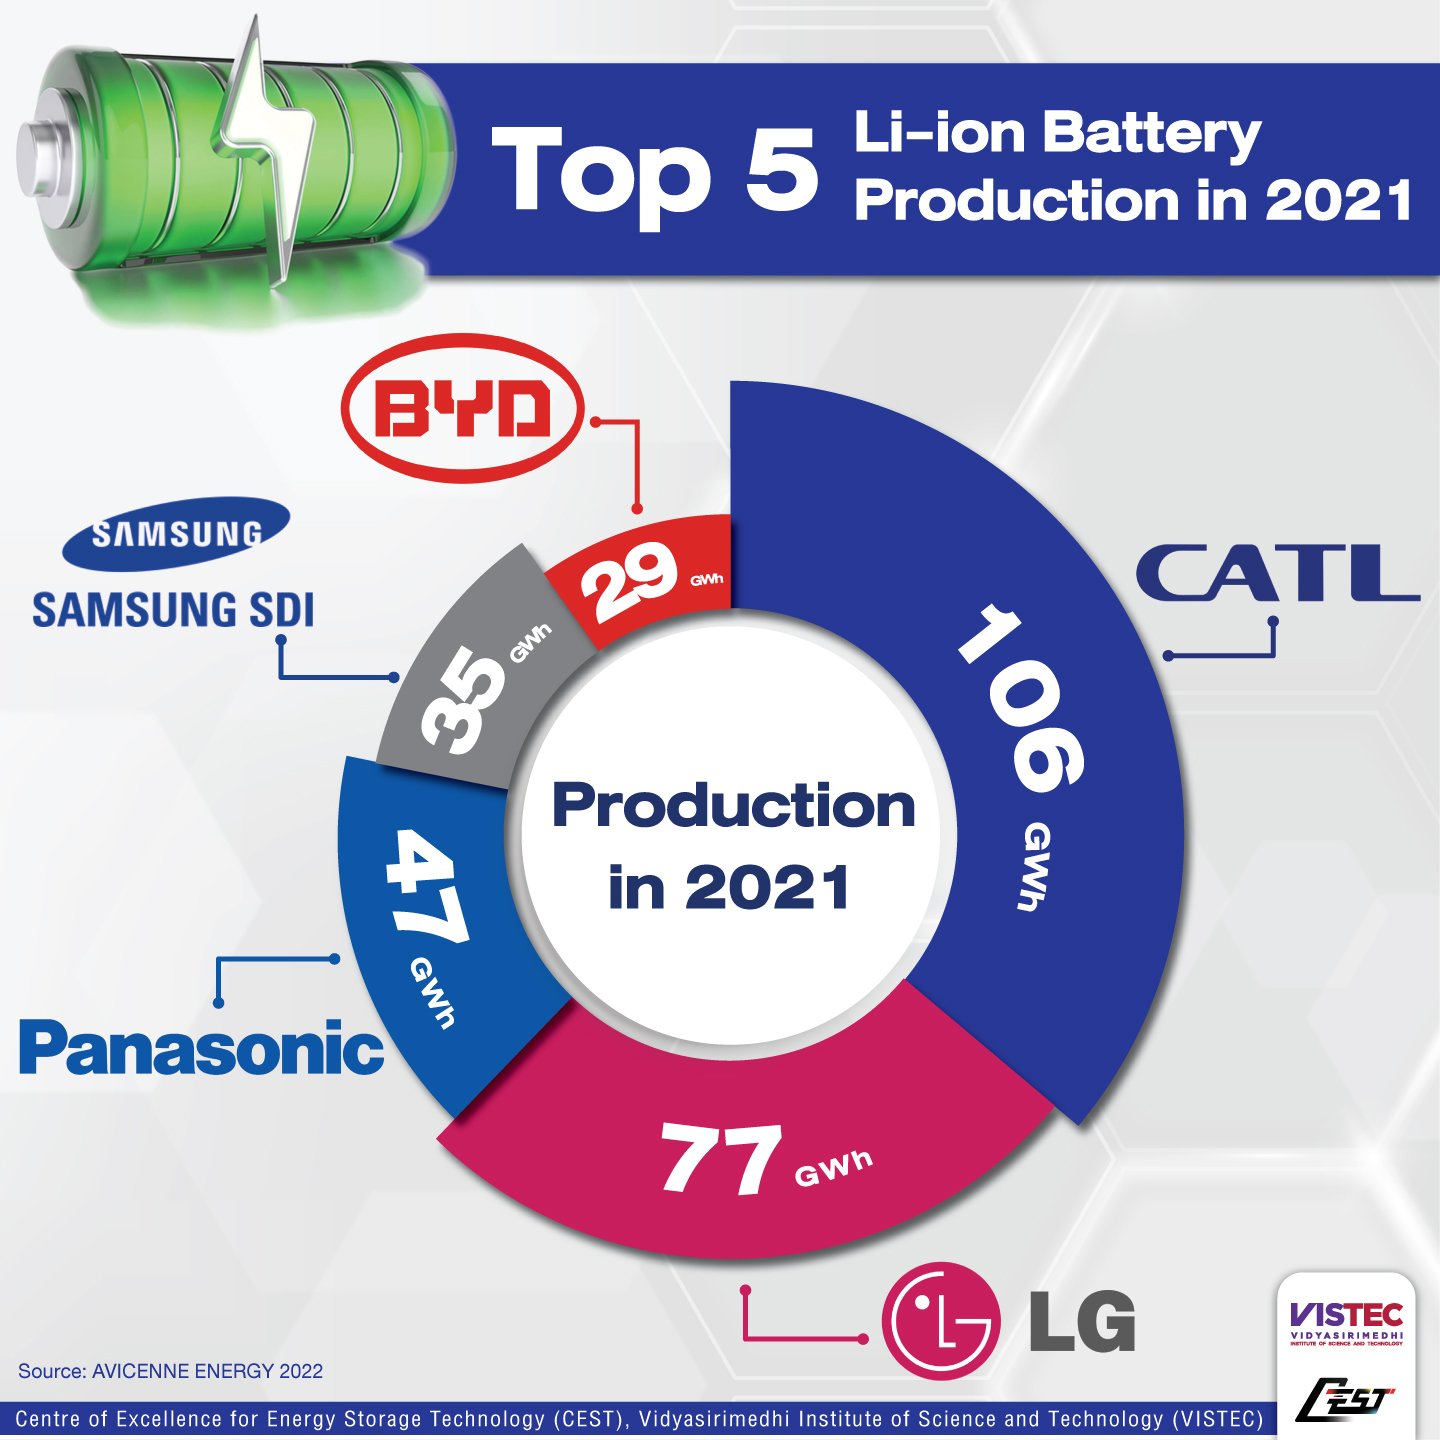 Top 5 Li-ion Battery Production in 2021 Source: AVICENNE ENERGY 2022